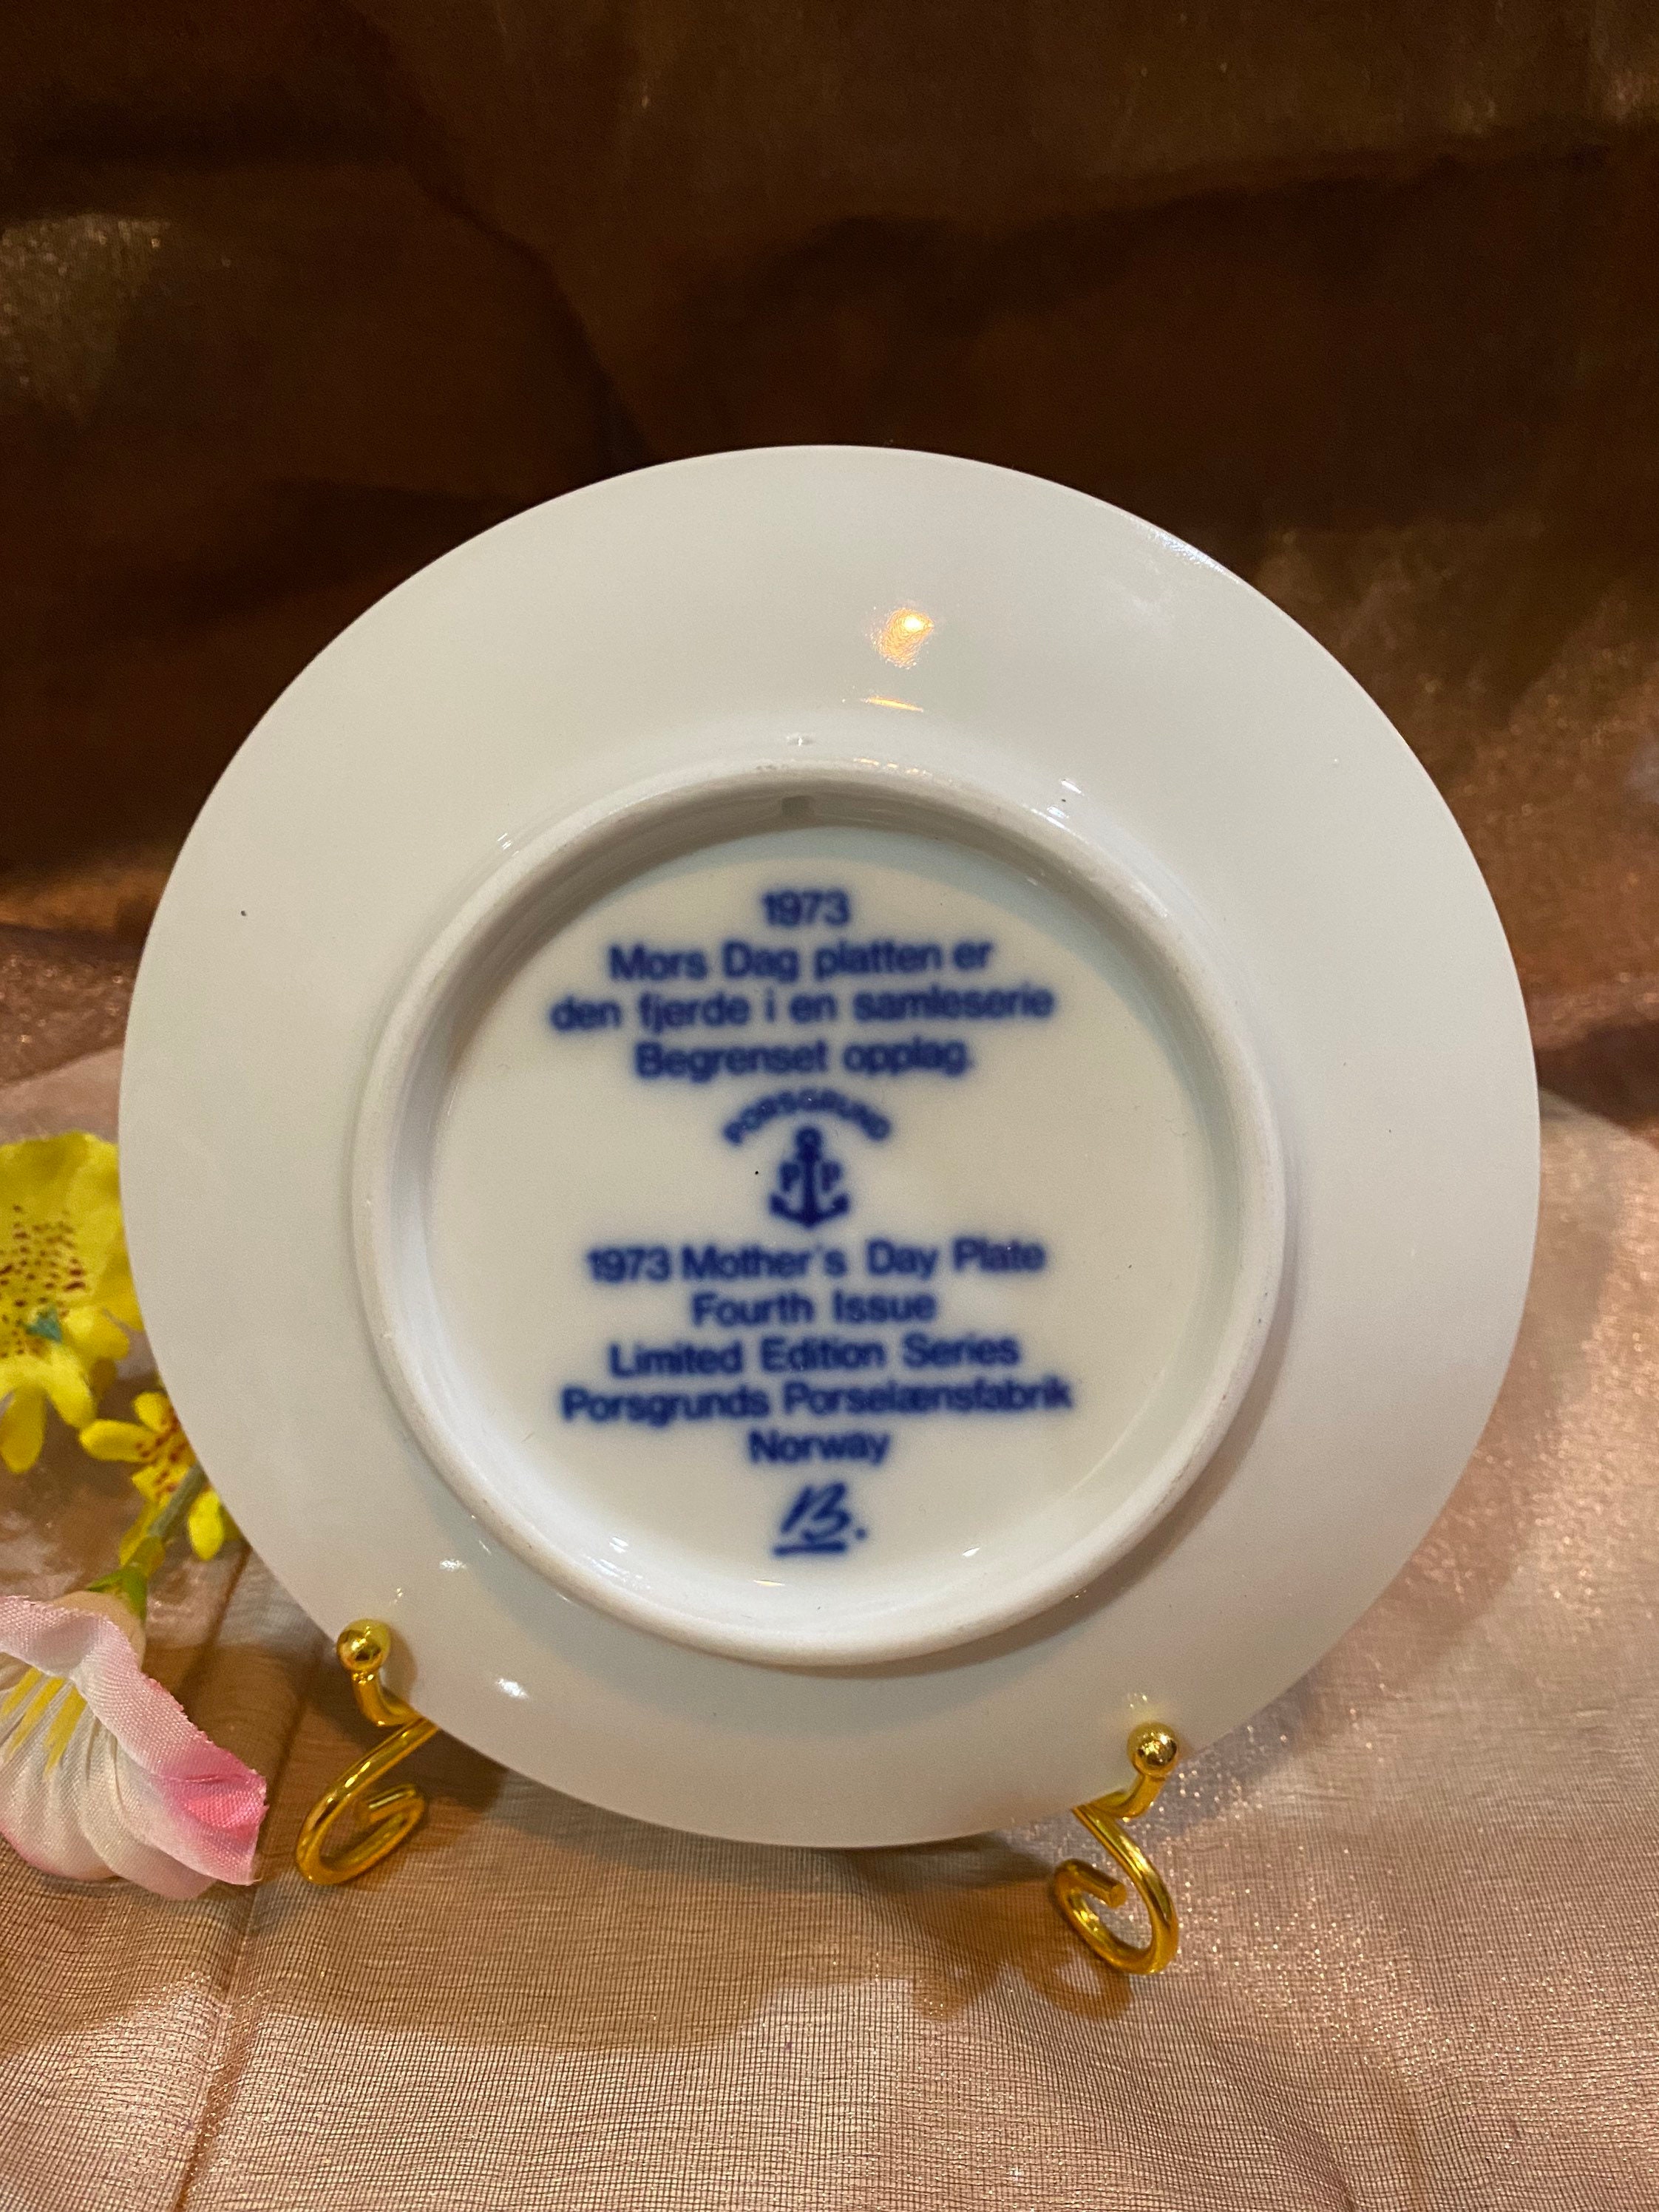 Porsgrund Norway Mors Dag Collectable Plate Mothers Day 1973 4th Issue limited 